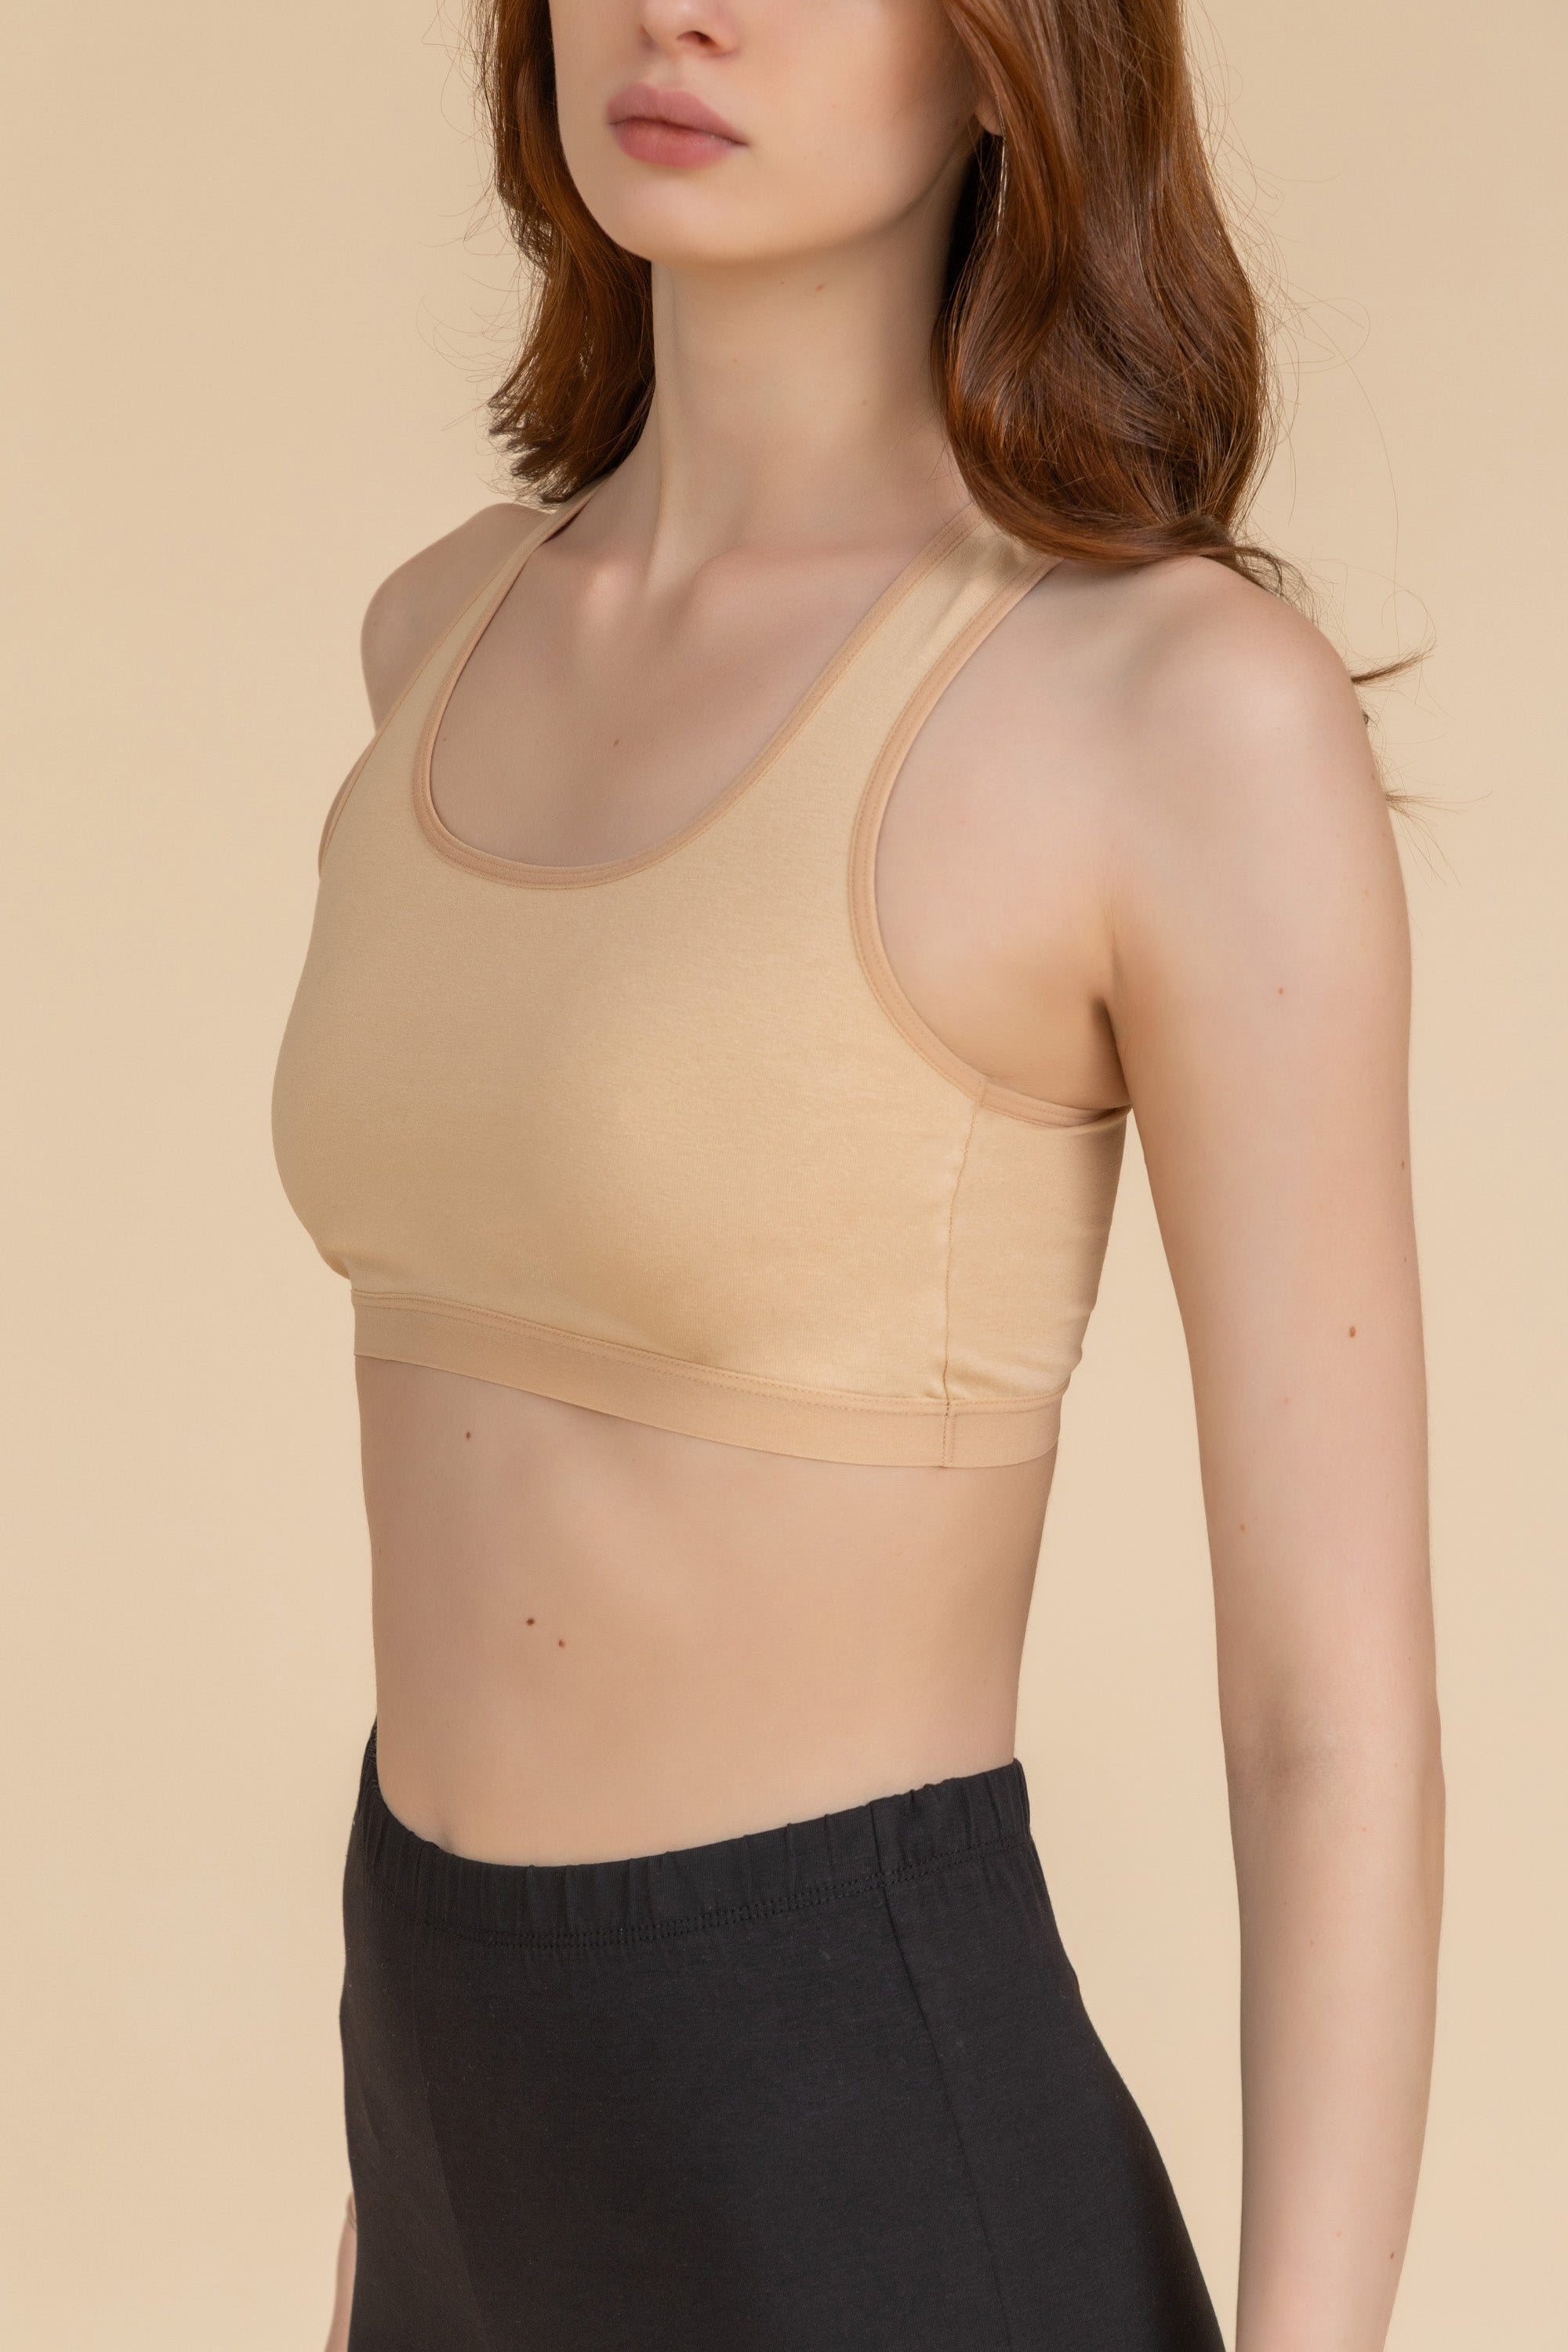 Summer Sports Bras For Women, Back Close Seamless Wirefree Plus